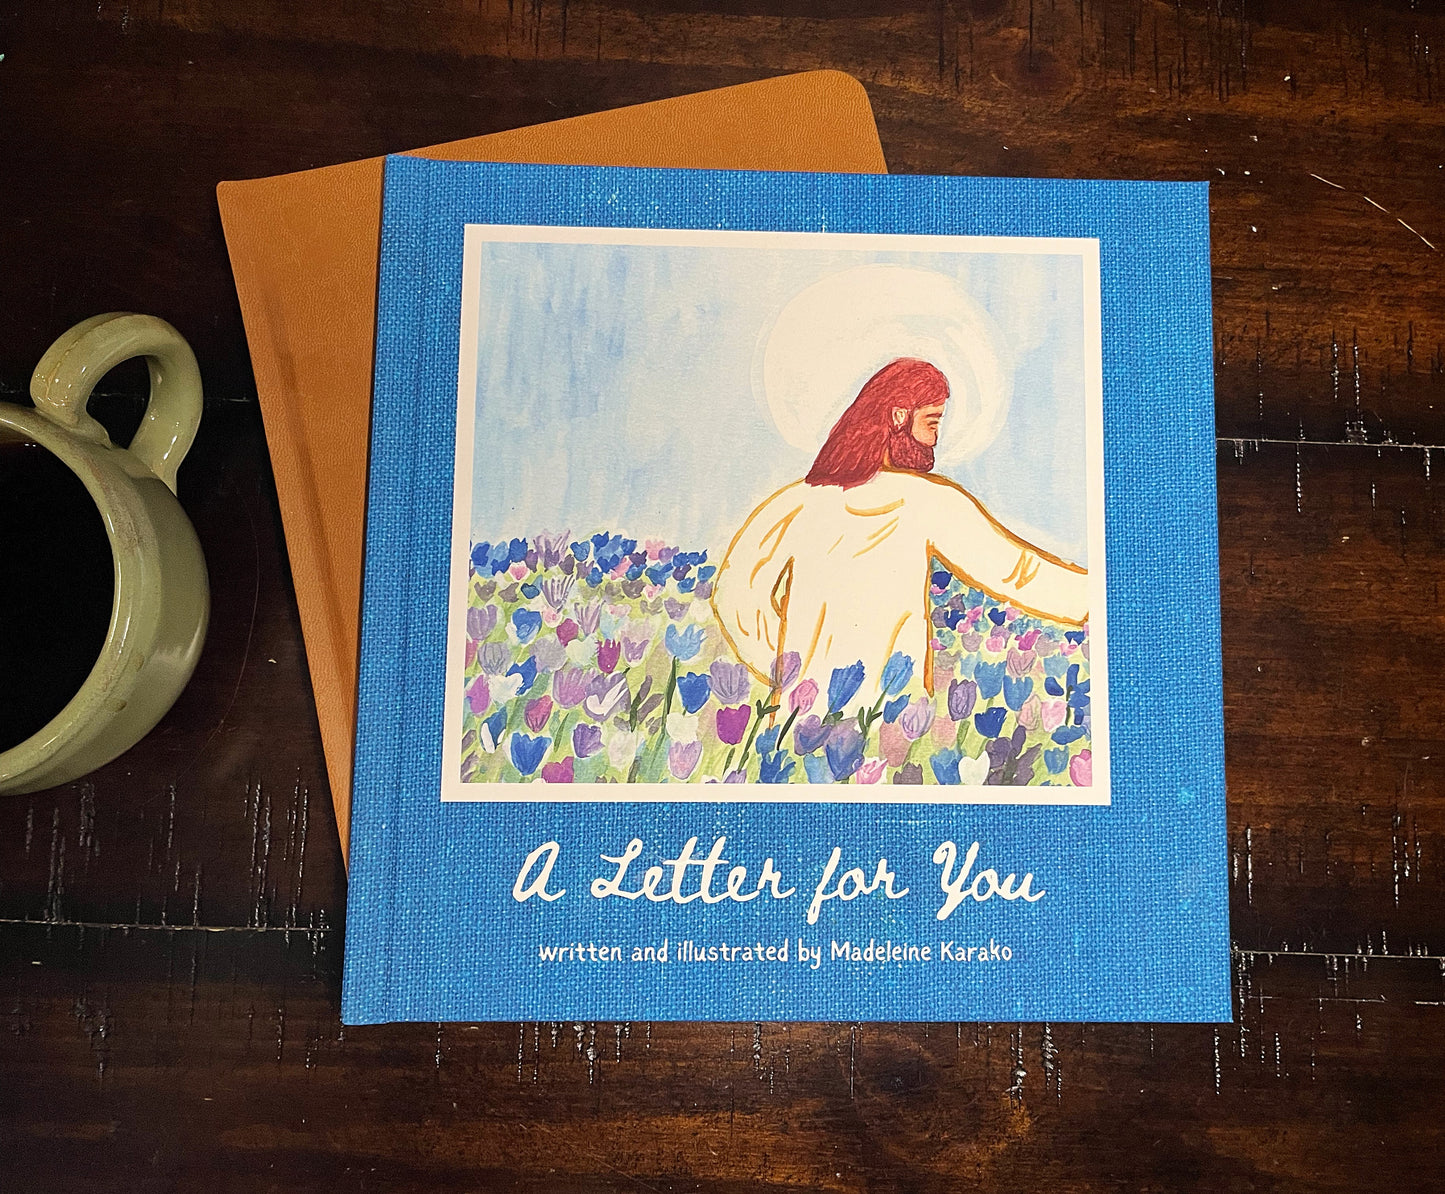 A Letter for You